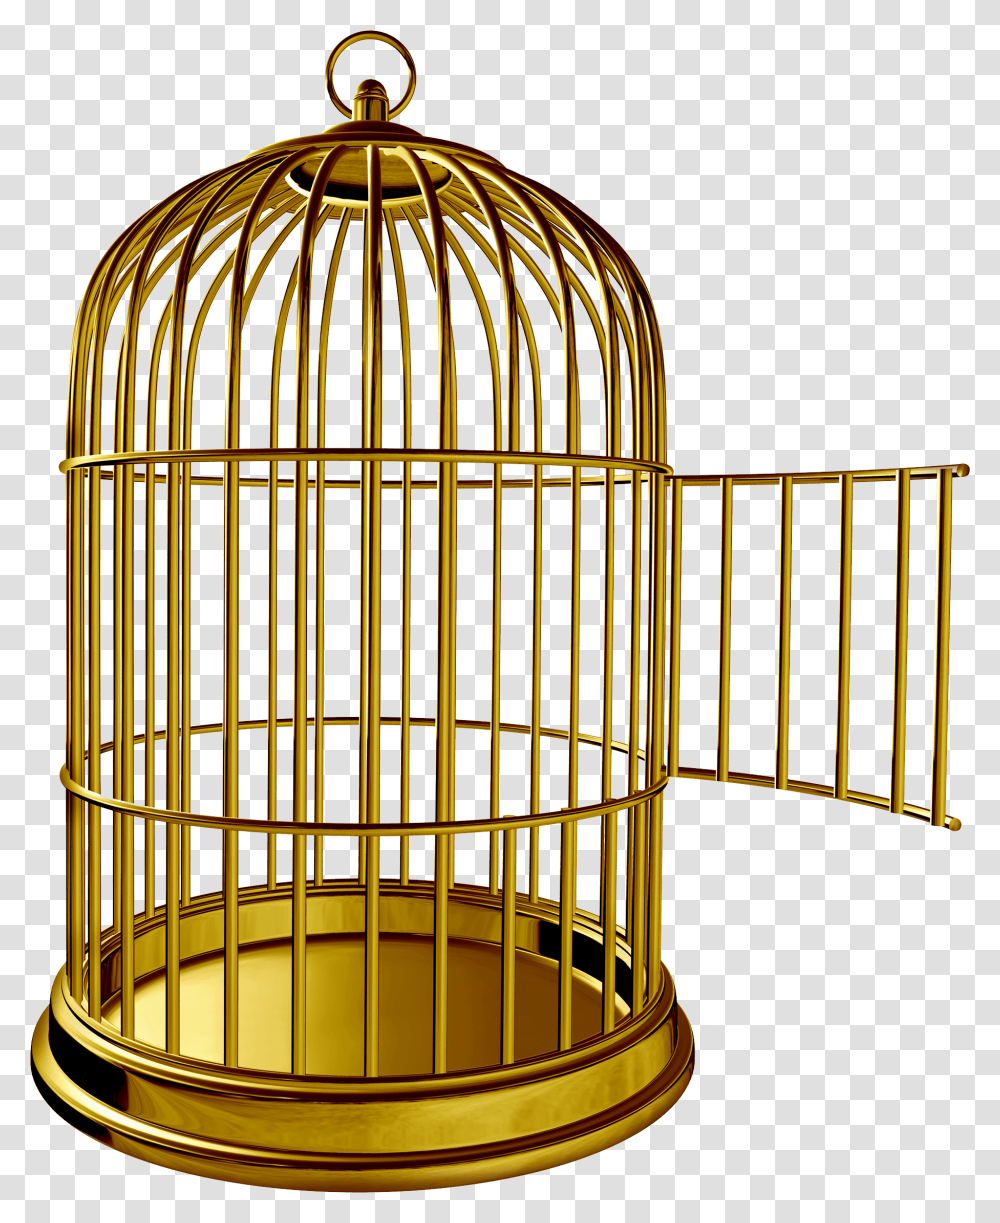 Golden Bird Cage Image, Trophy, Sphere, Brass Section, Musical Instrument Transparent Png